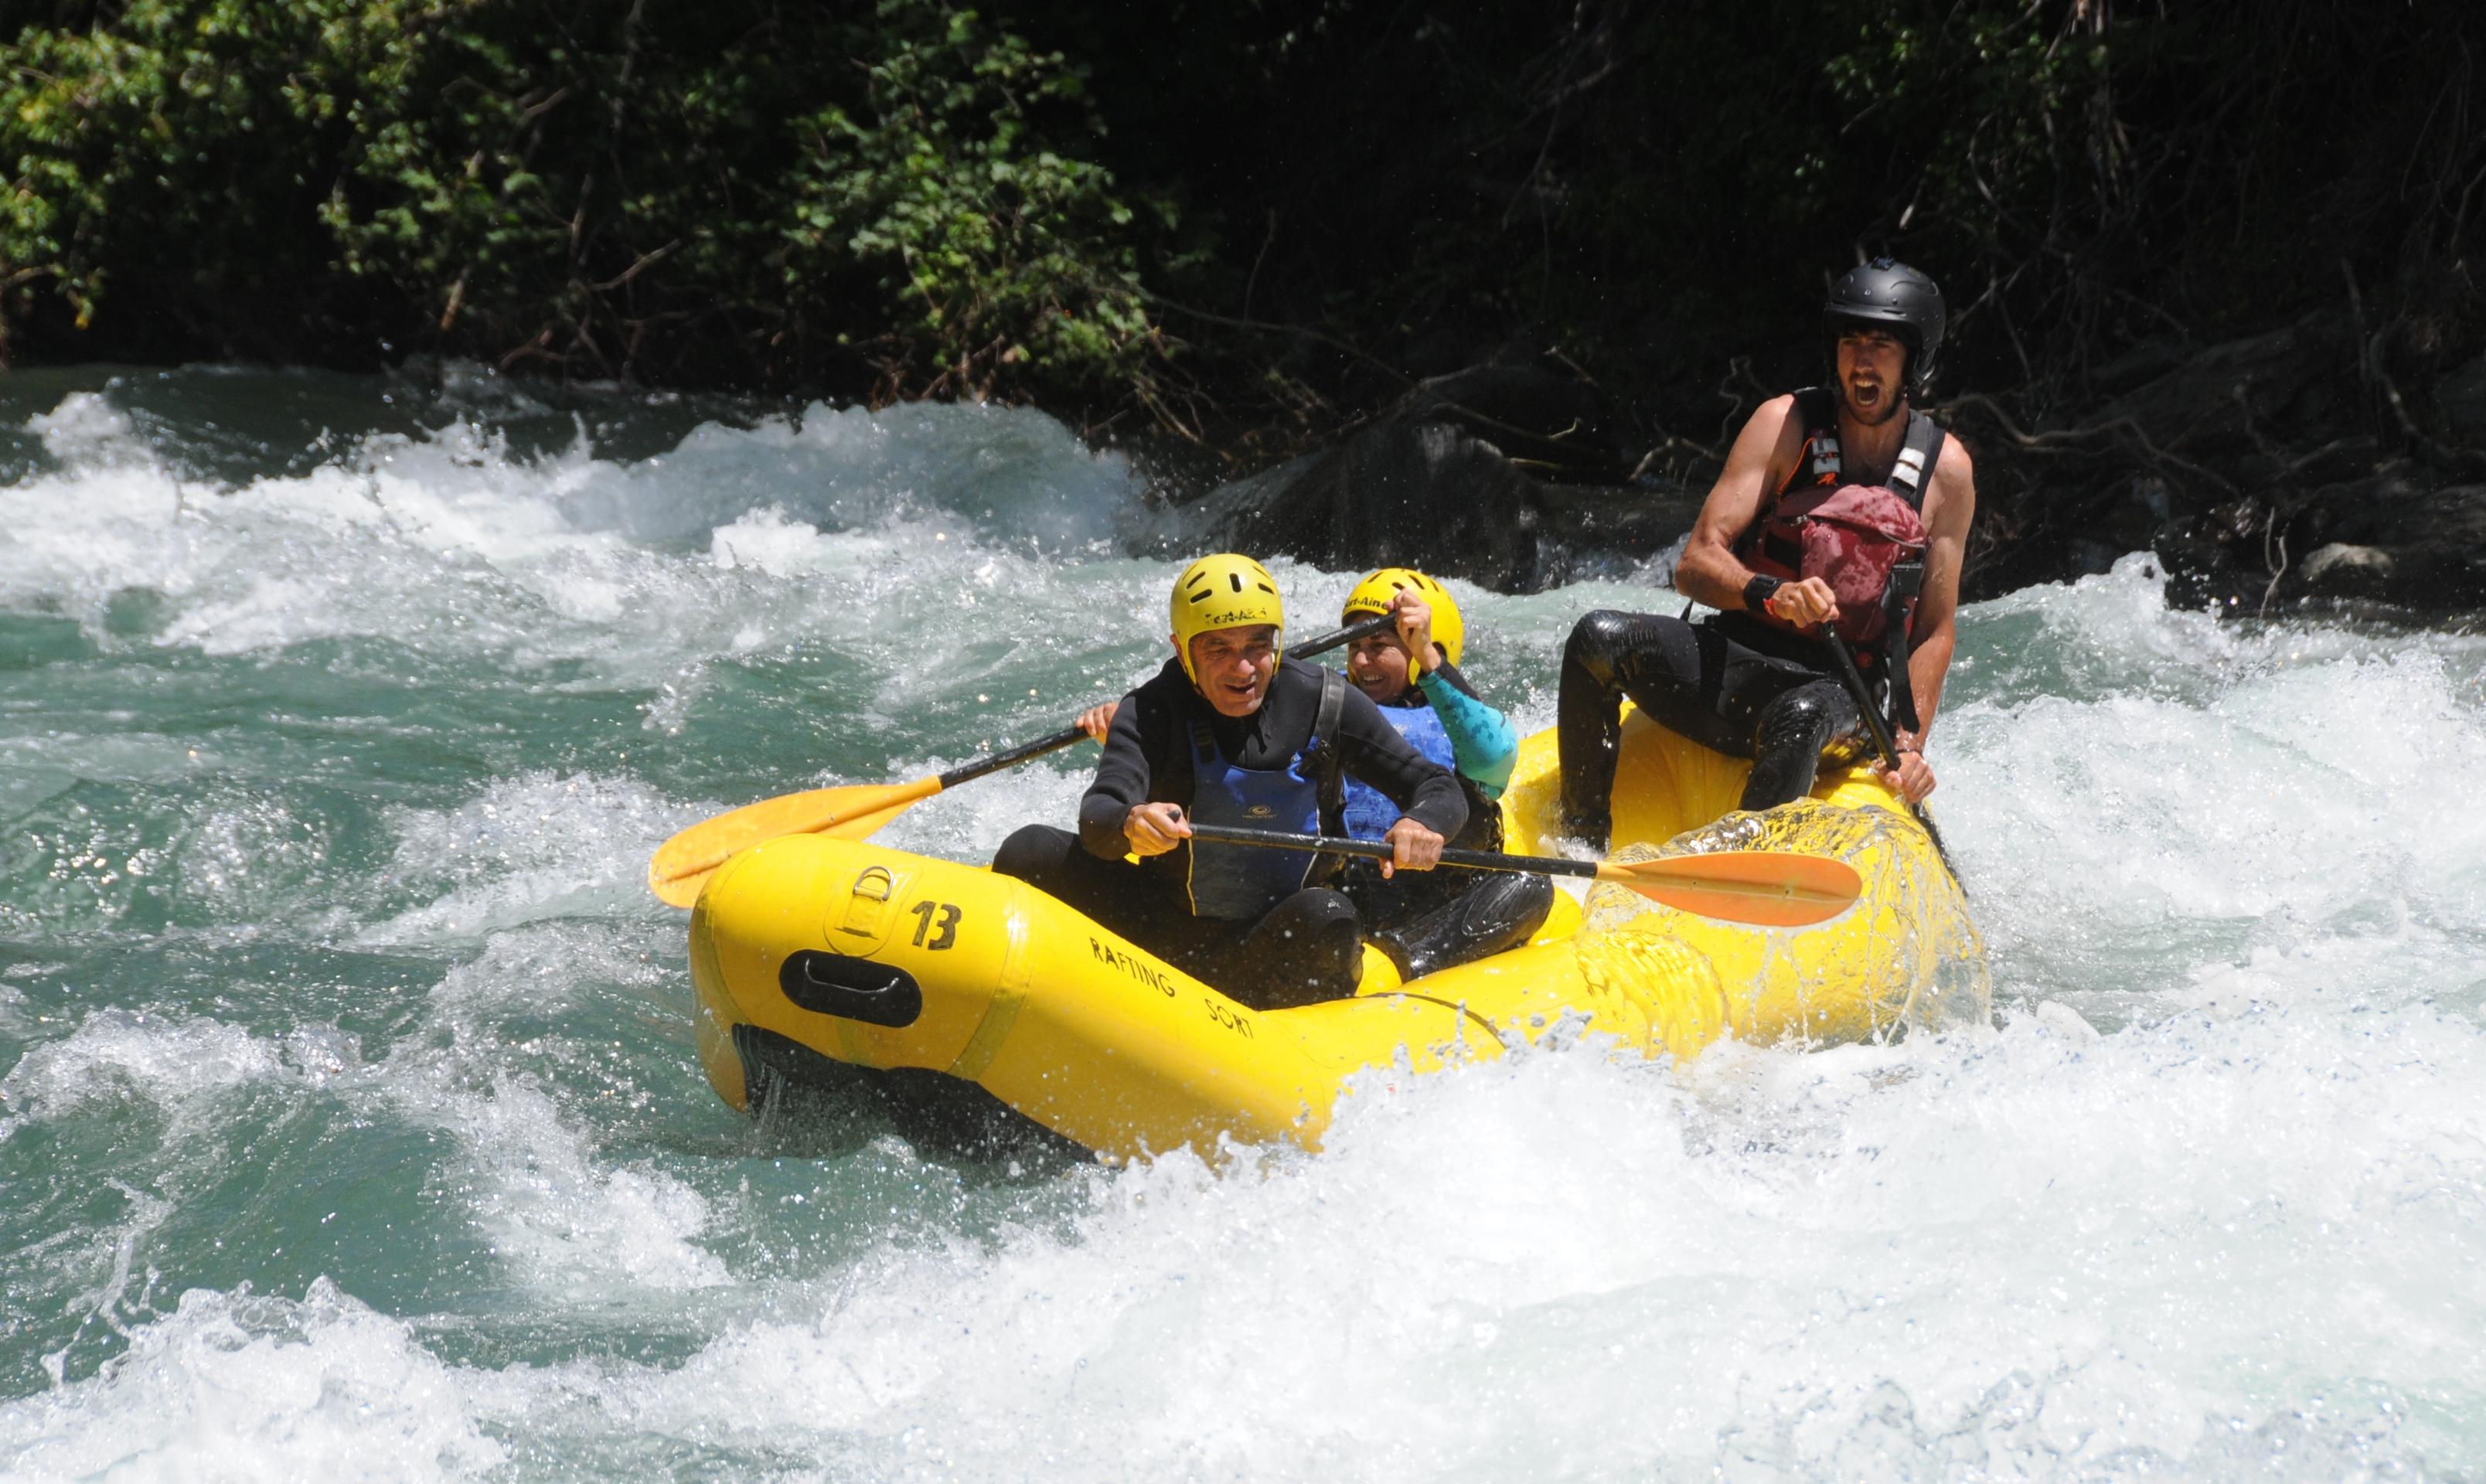 Rafting in the Spanish Pyrenees - 3 hours from Barcelona